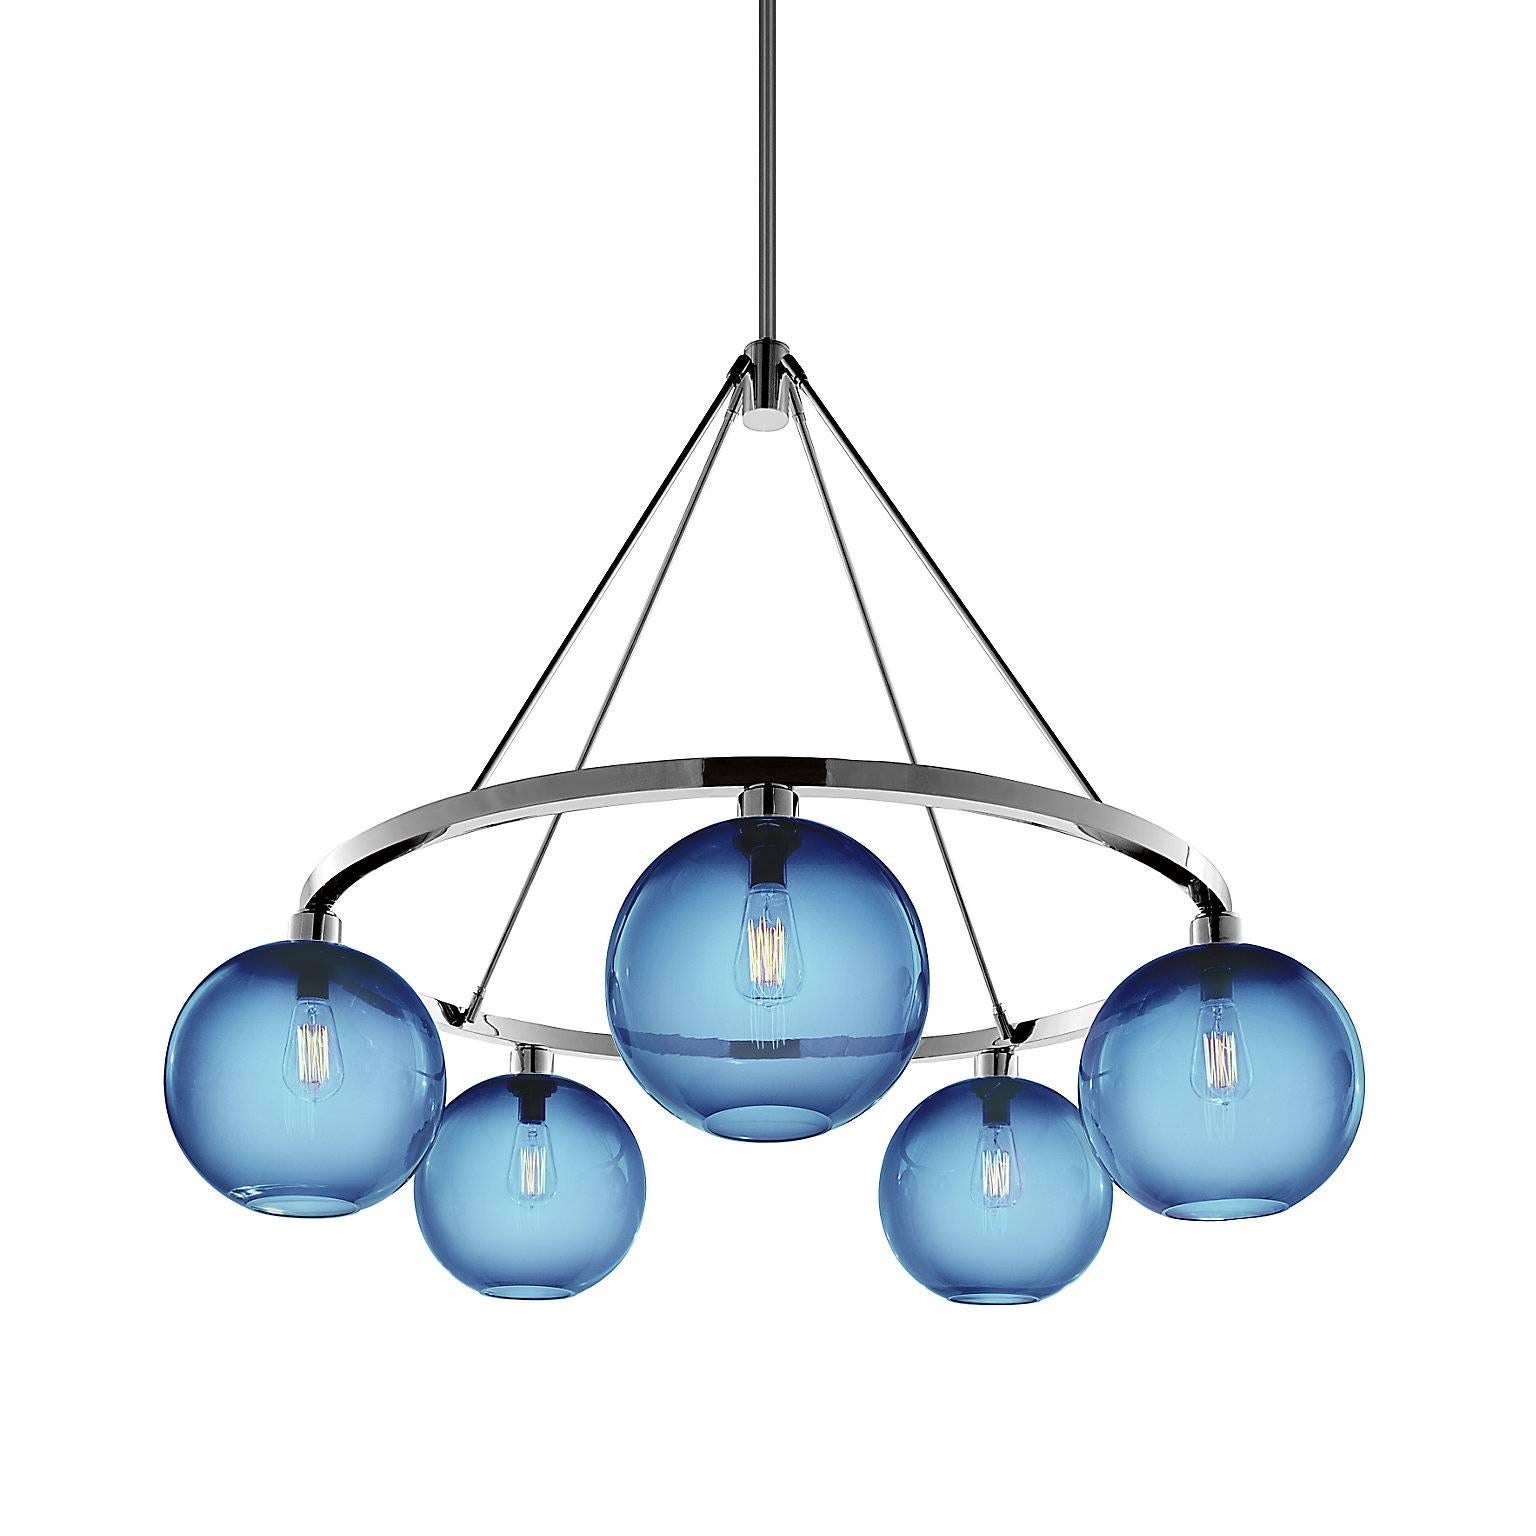 Imbued with timeless style, the striking solitaire chandelier showcases sophisticated metal finishes, a classic, handcrafted silhouette, and the soft glow of the Edison bulb at its centre. Every single glass light that comes from Niche is handblown